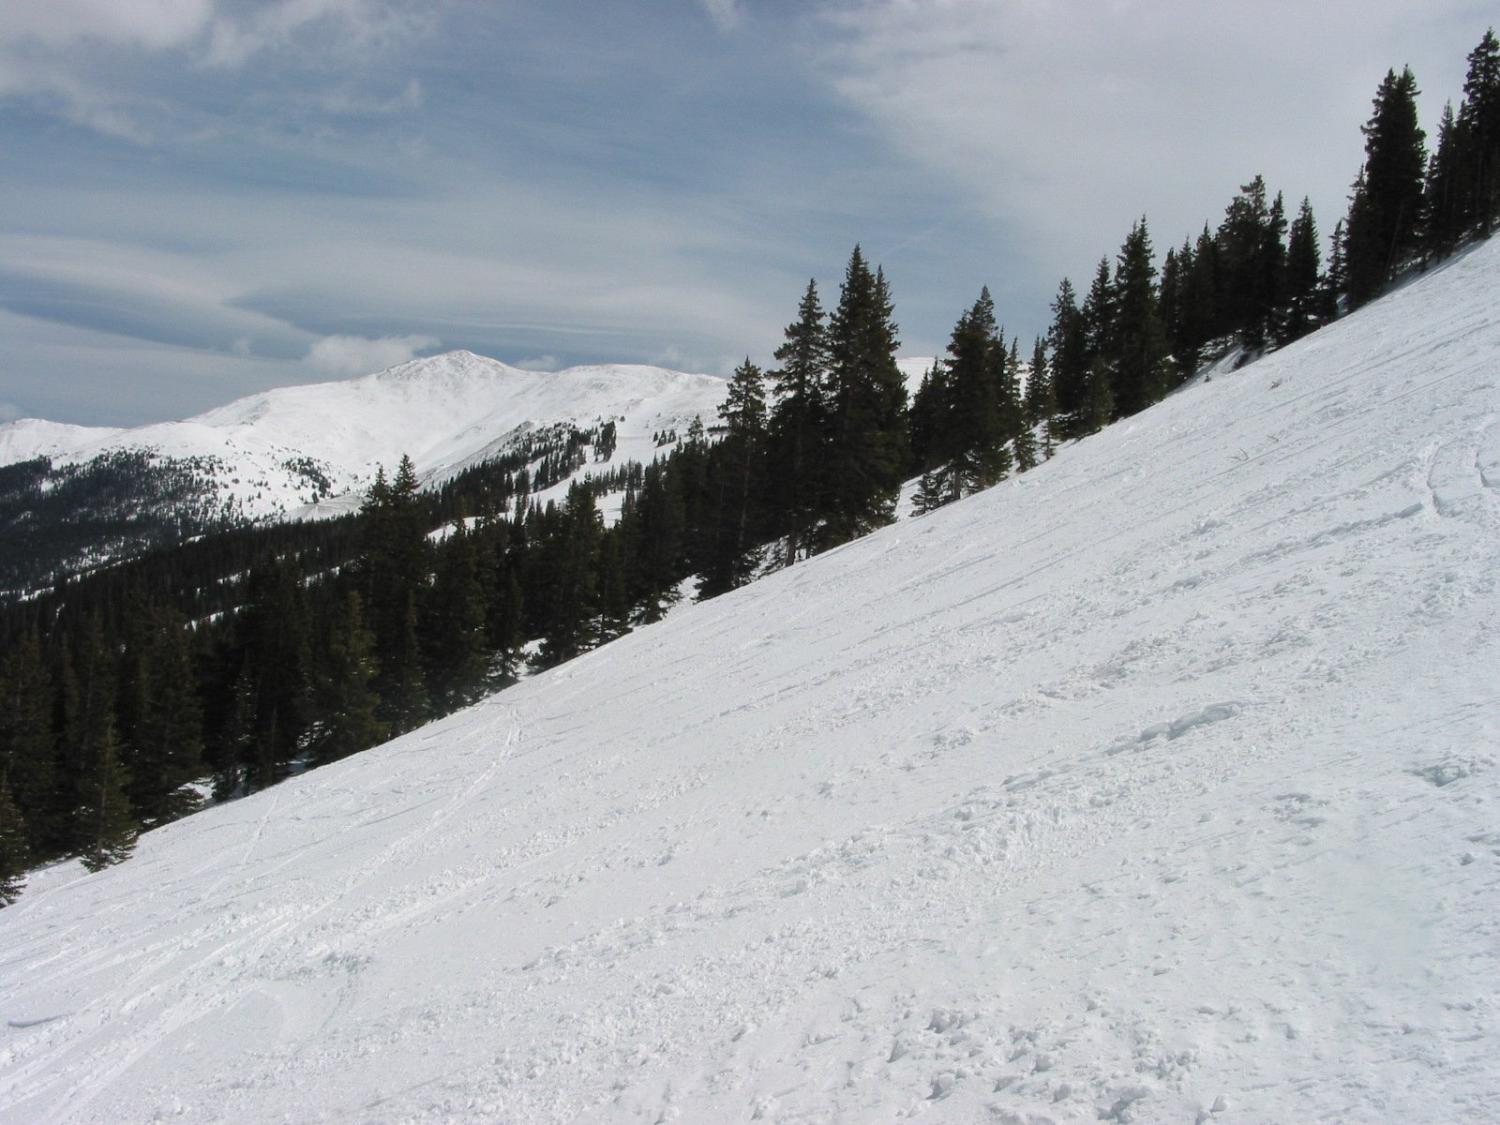 Looking across South Chutes to the east